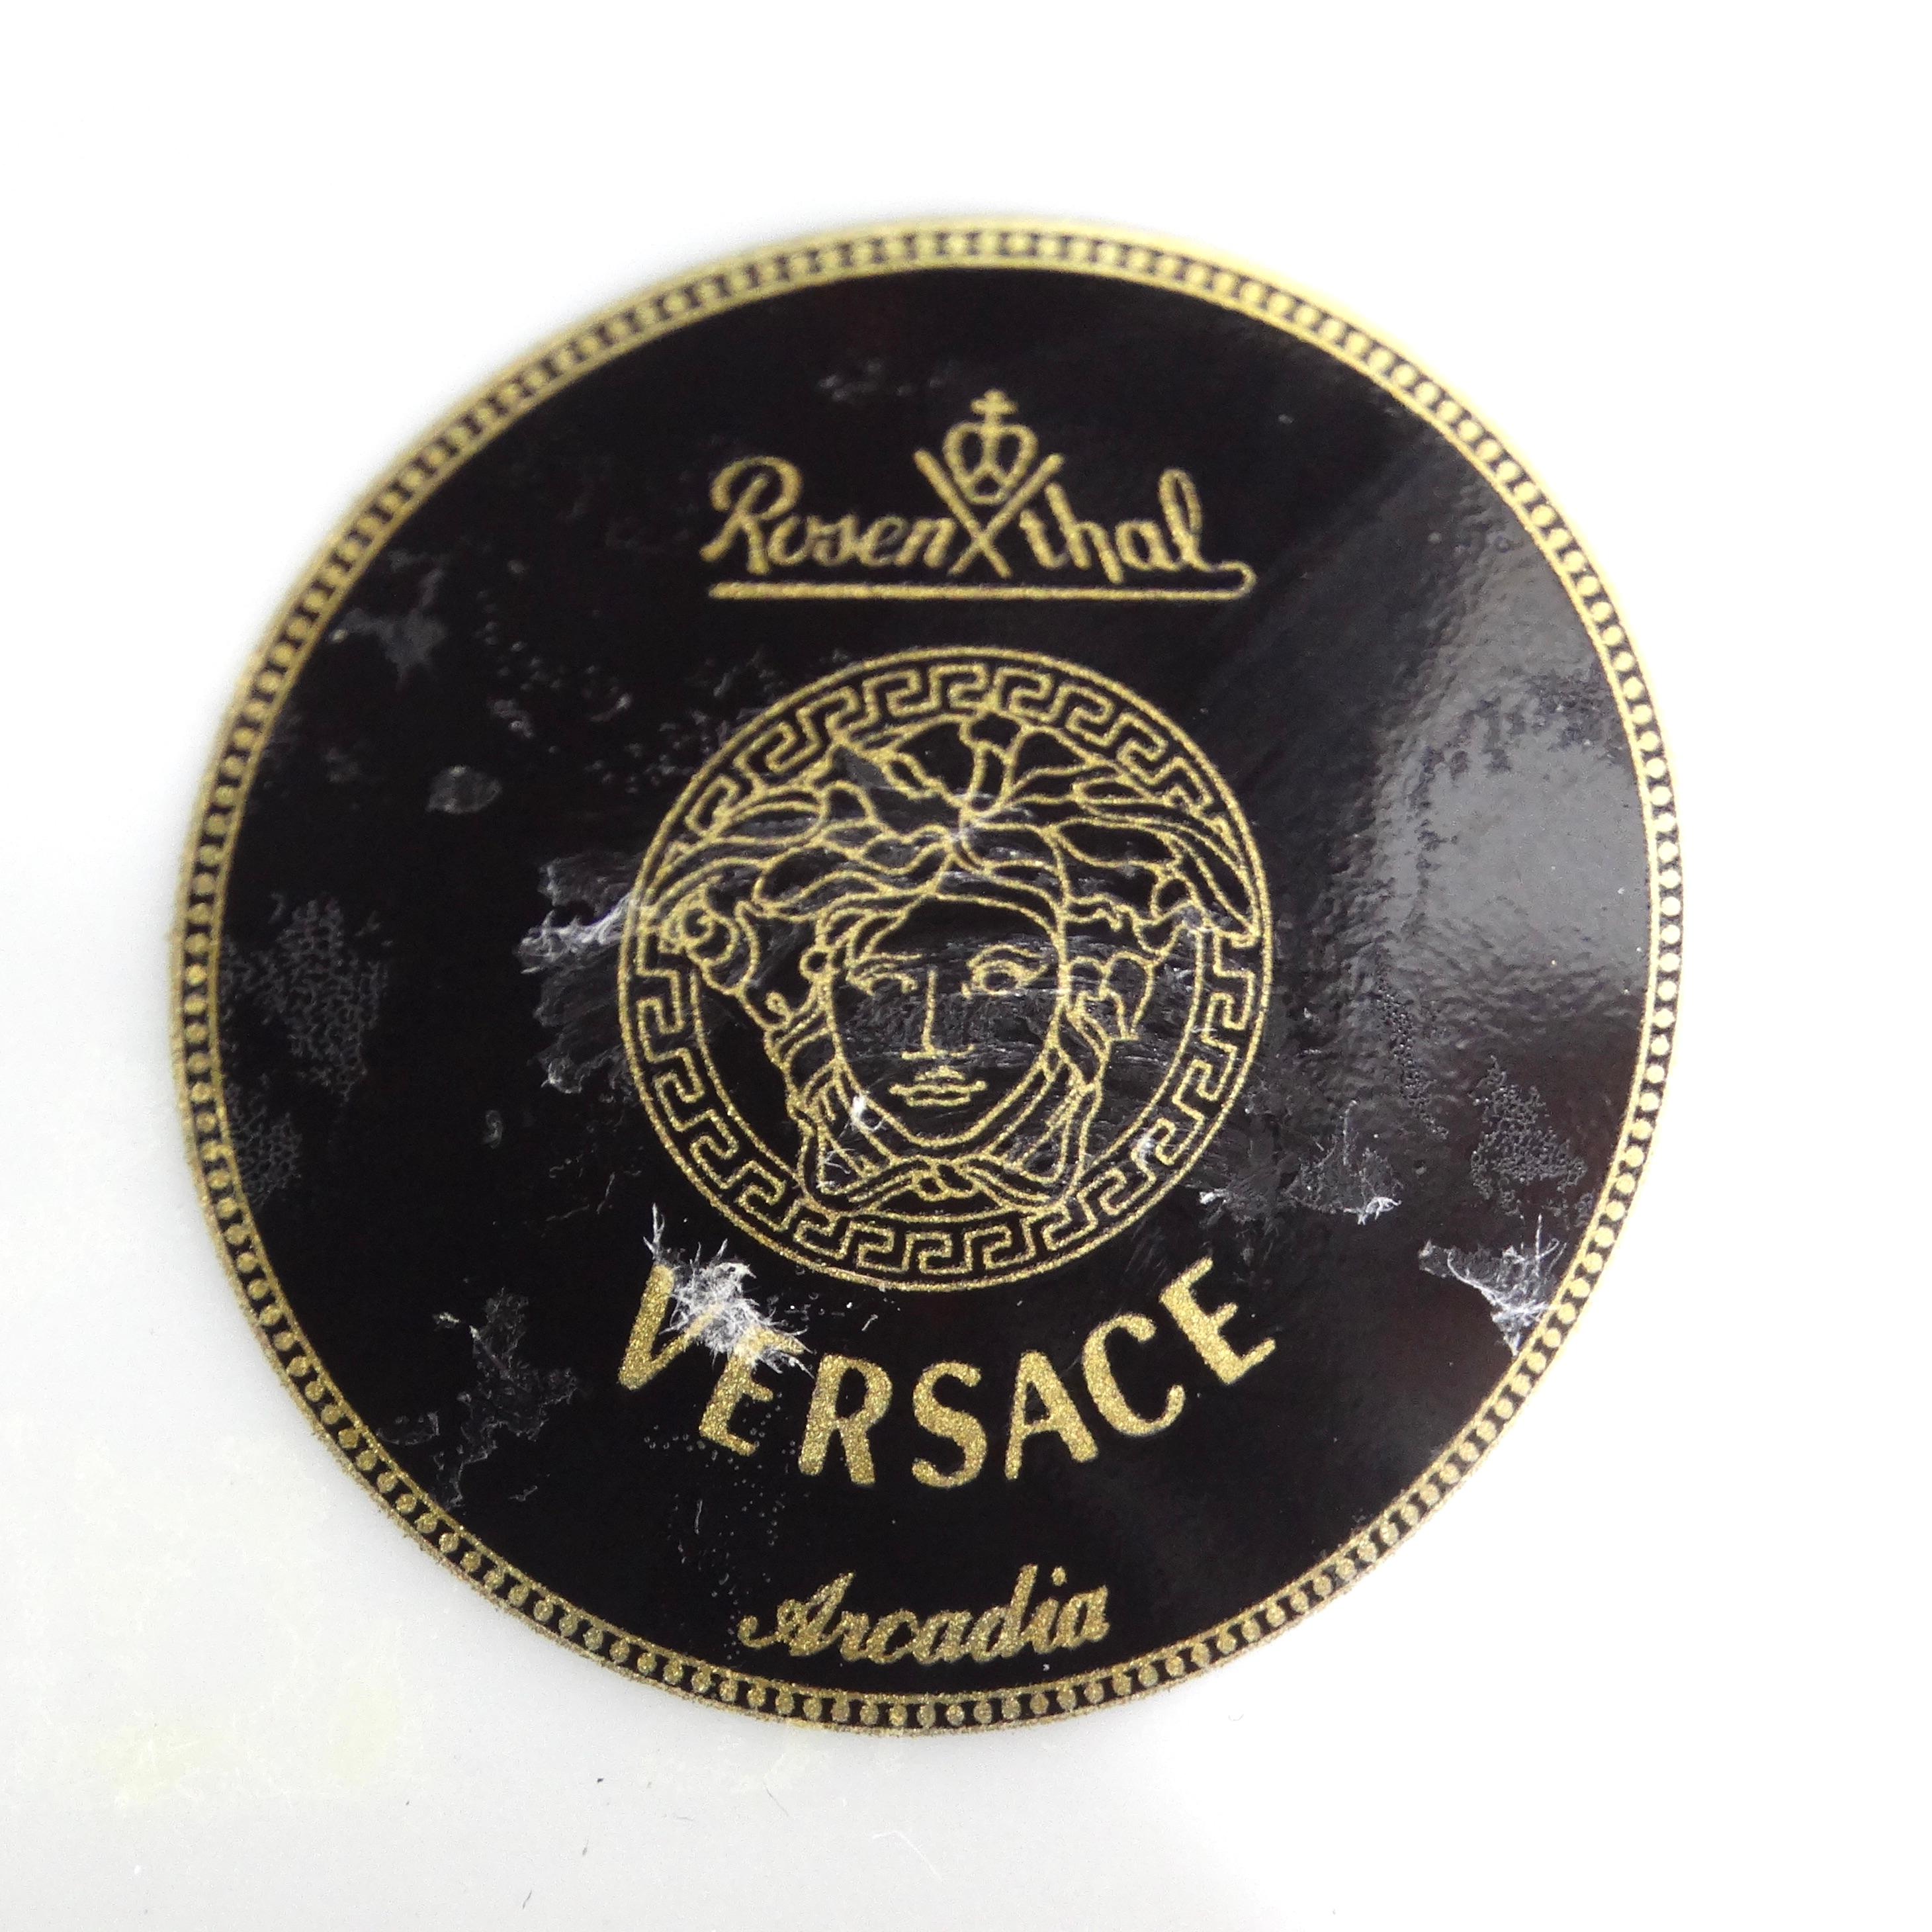 Versace Rosenthal 1990s Porcelain Table Clock For Sale 5